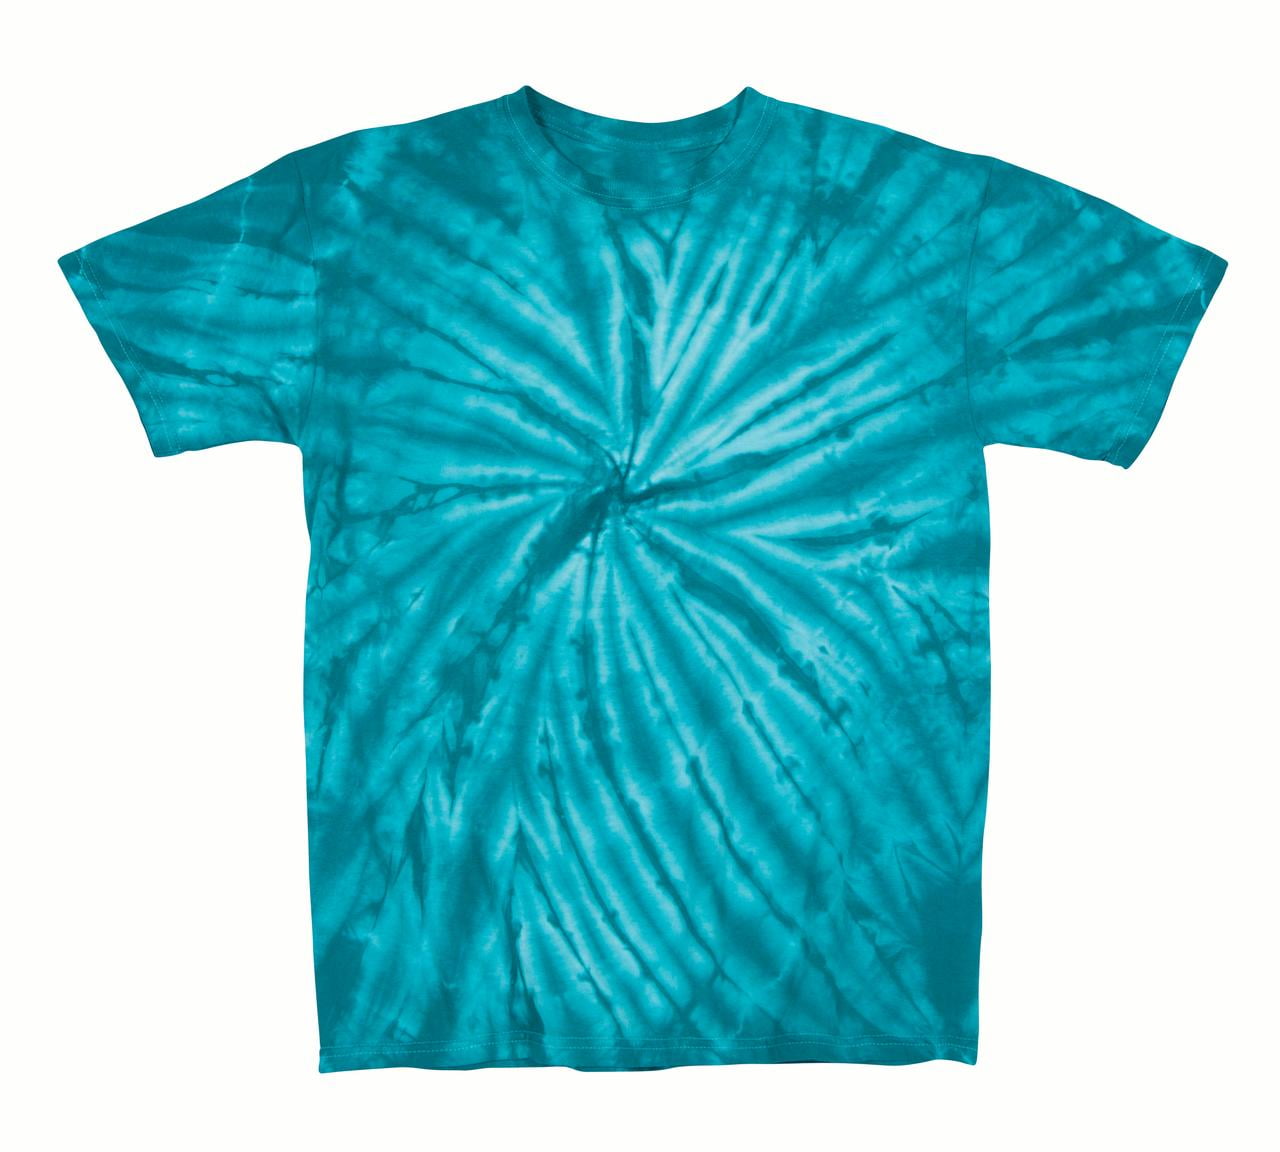 Faded Cyclone Scattered Pattern Design Unisex Adult Tie Dye T-Shirt Tee ...